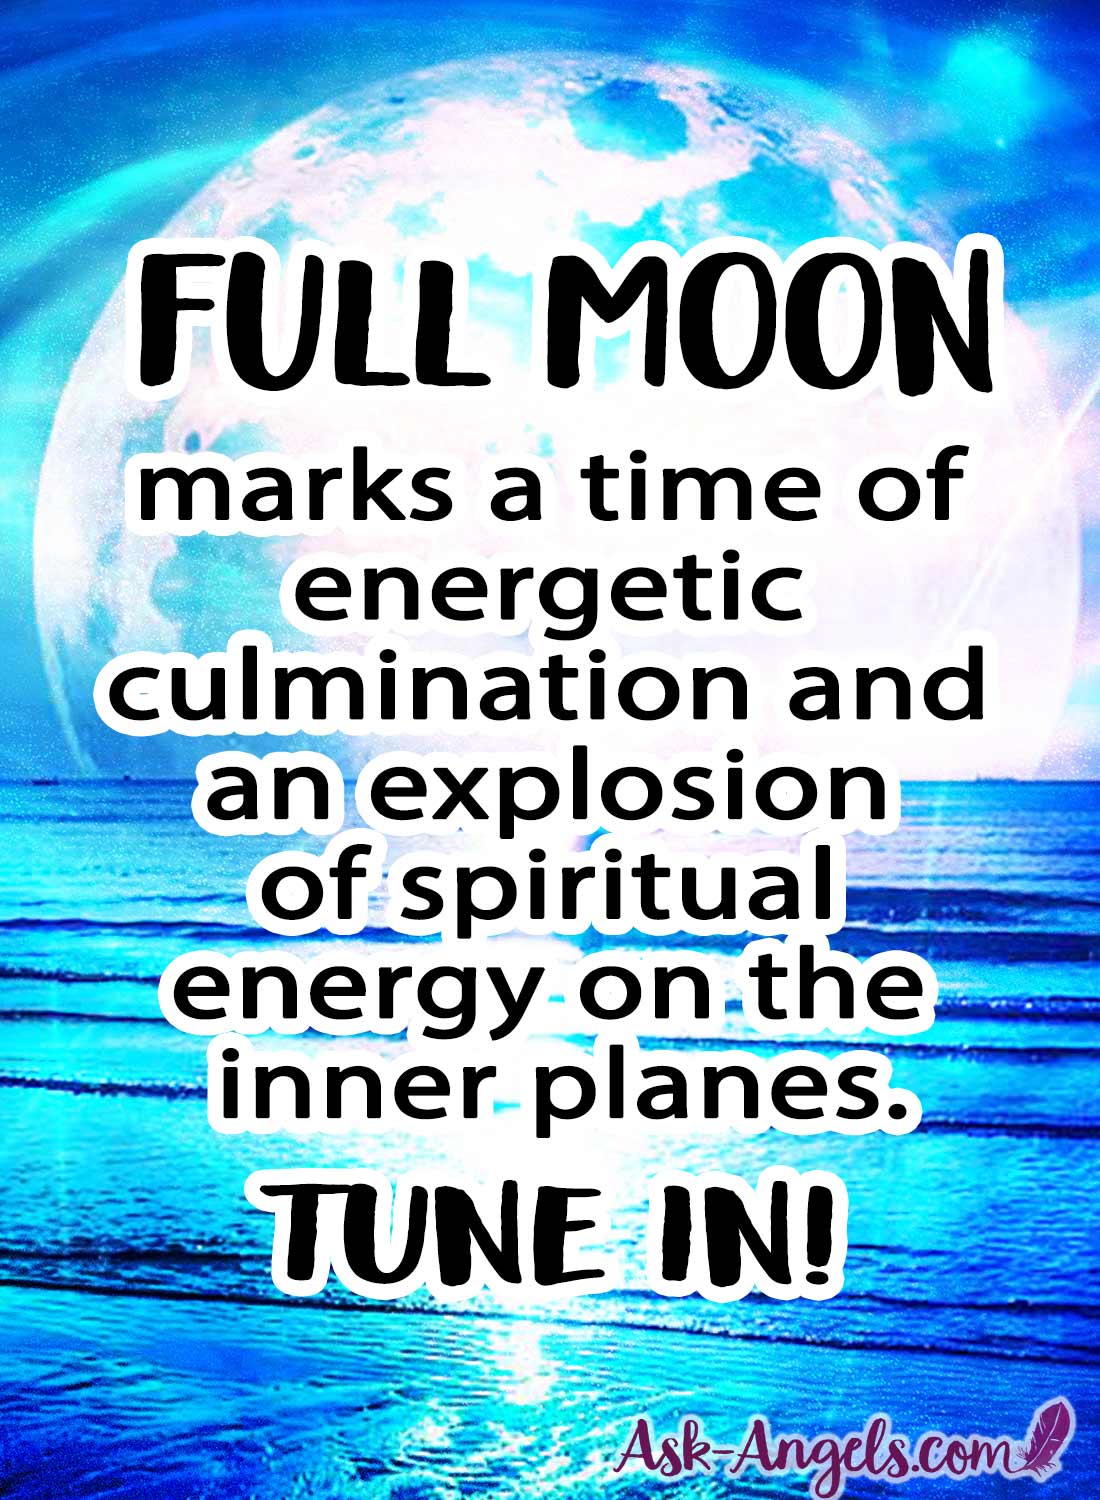 The Full Moon marks a time of energetic culmination and an explosion of spiritual energy on the inner planes.